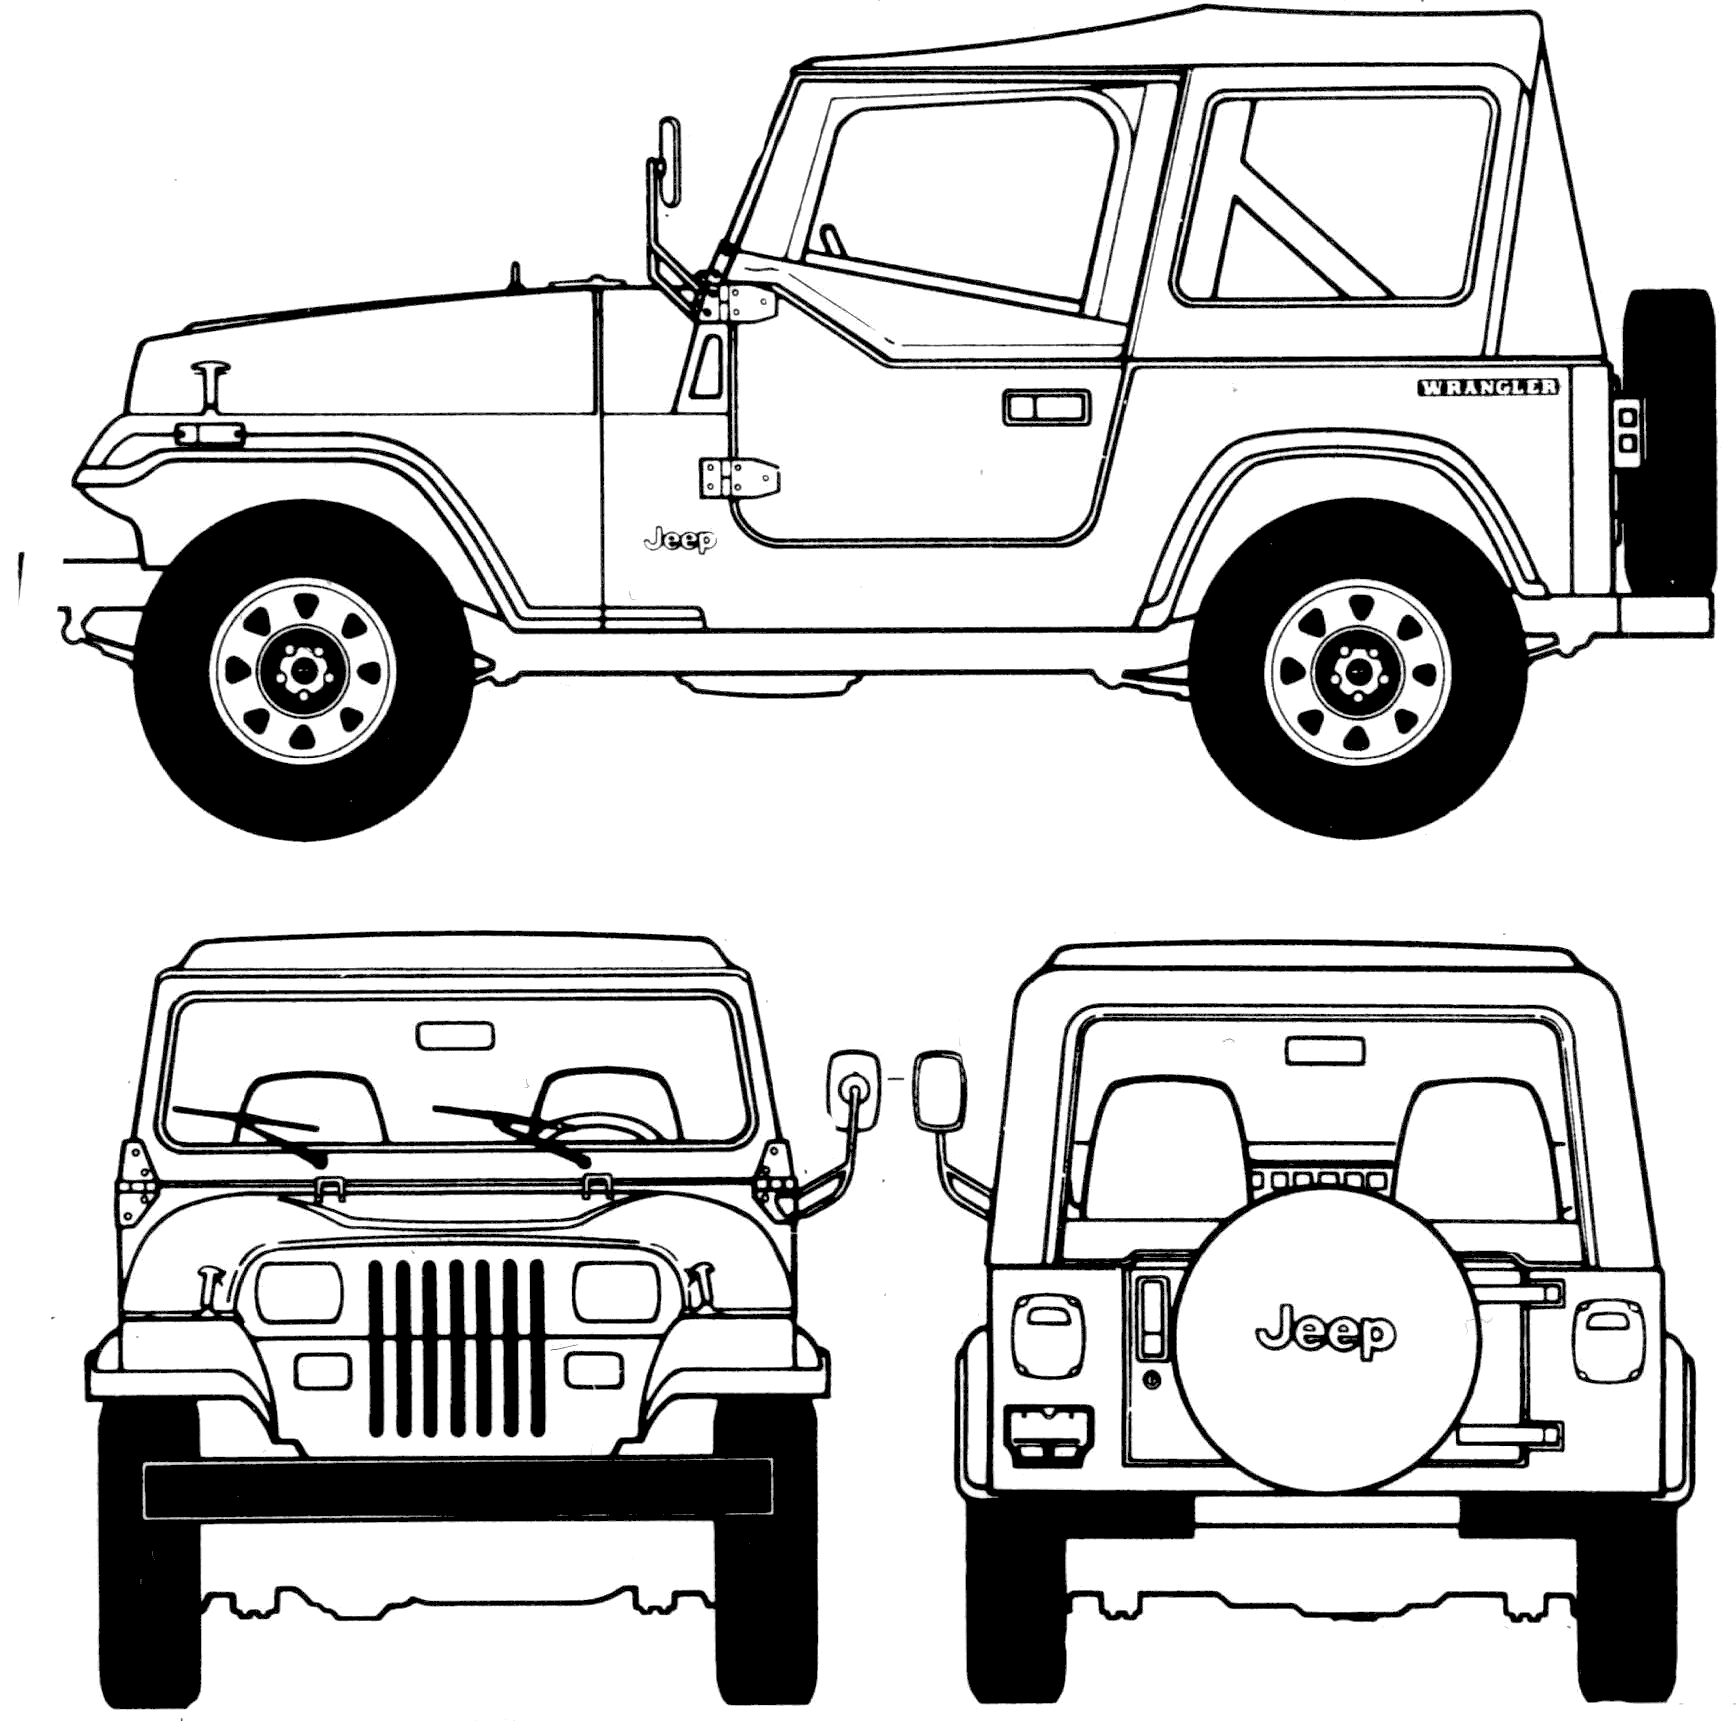 jeep clipart orthographic